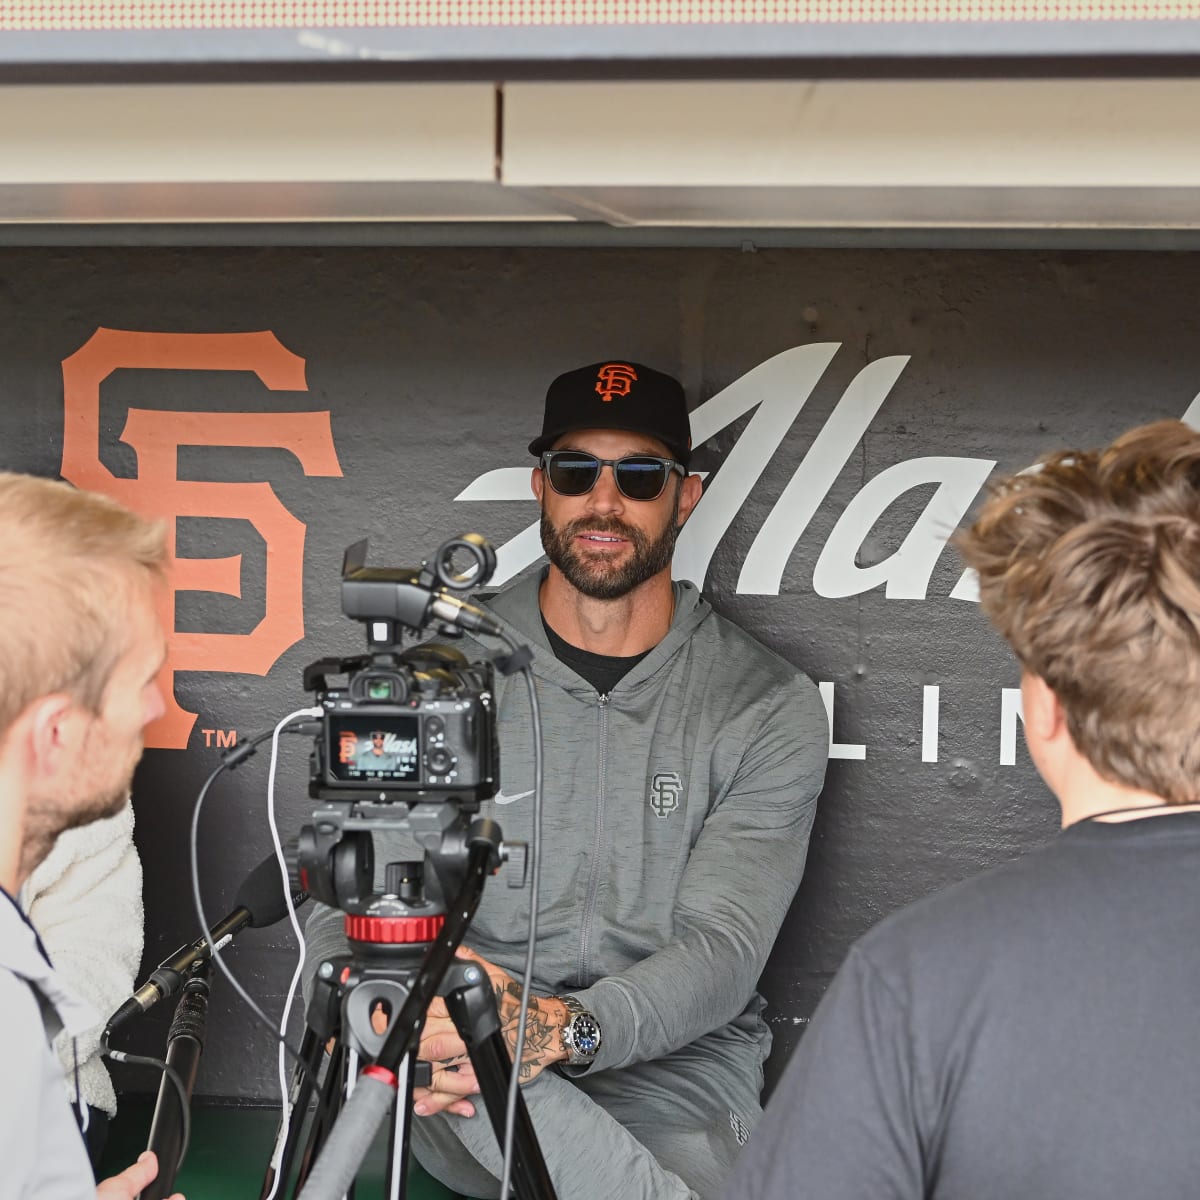 Gabe Kapler expects all SF Giants players to wear Pride uniforms